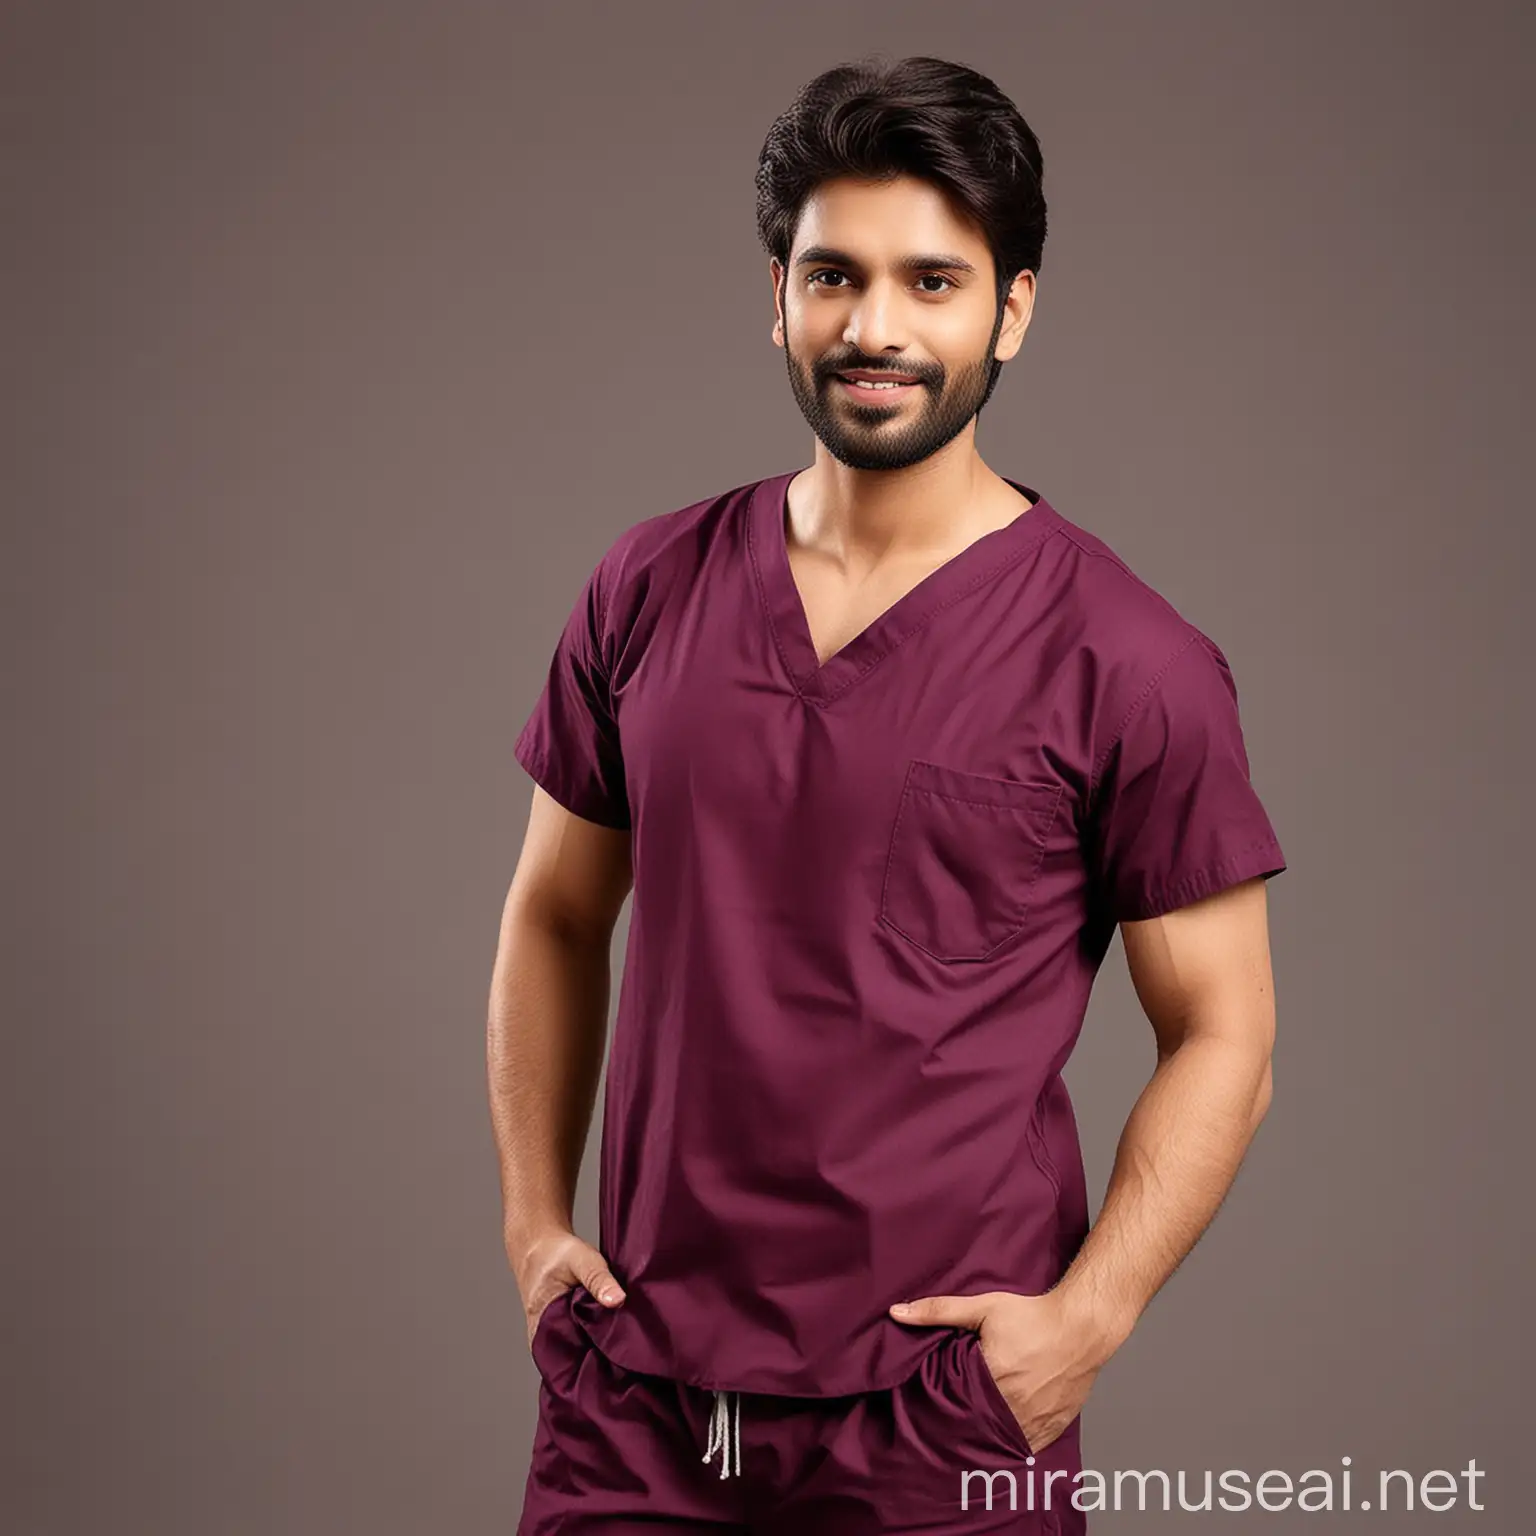 Indian Male Model in Stylish WineColored Doctor Scrubs